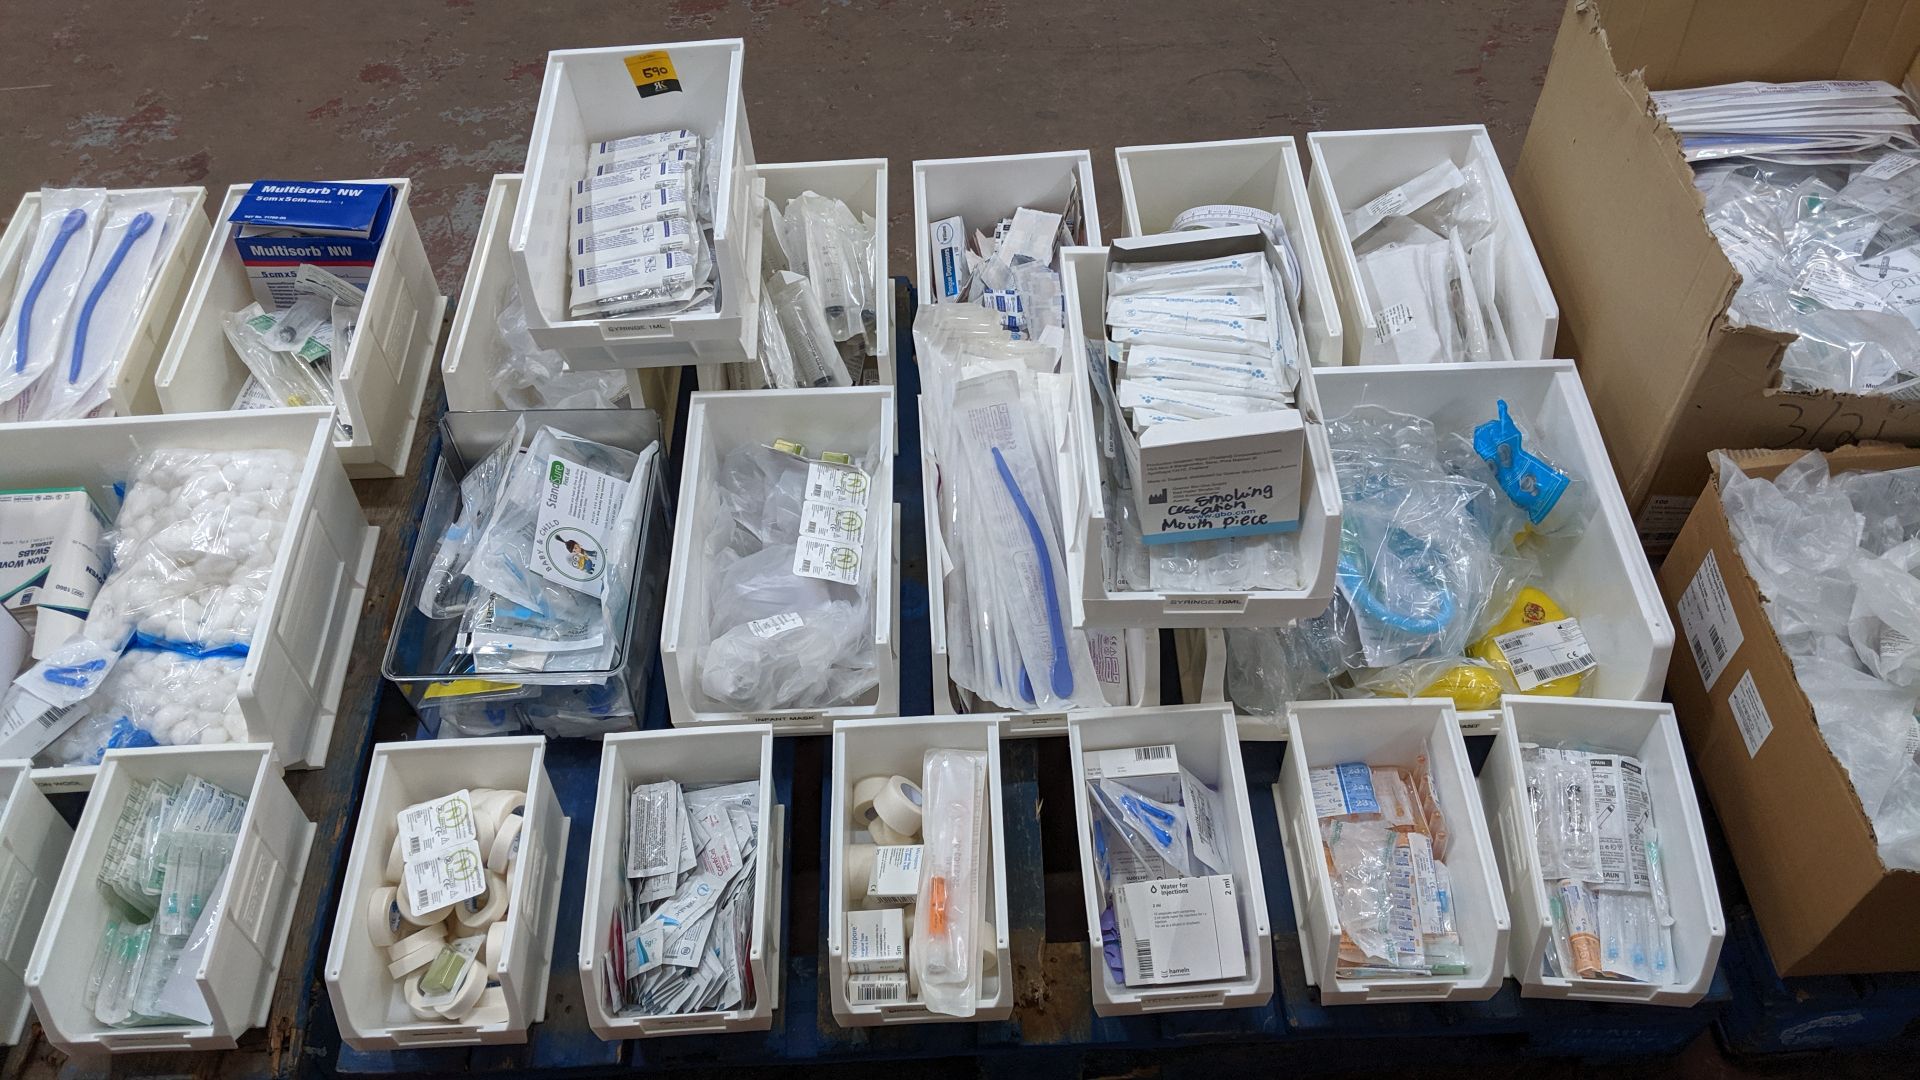 Contents of a pallet of medical supplies consisting of a large quantity of plastic bins & their